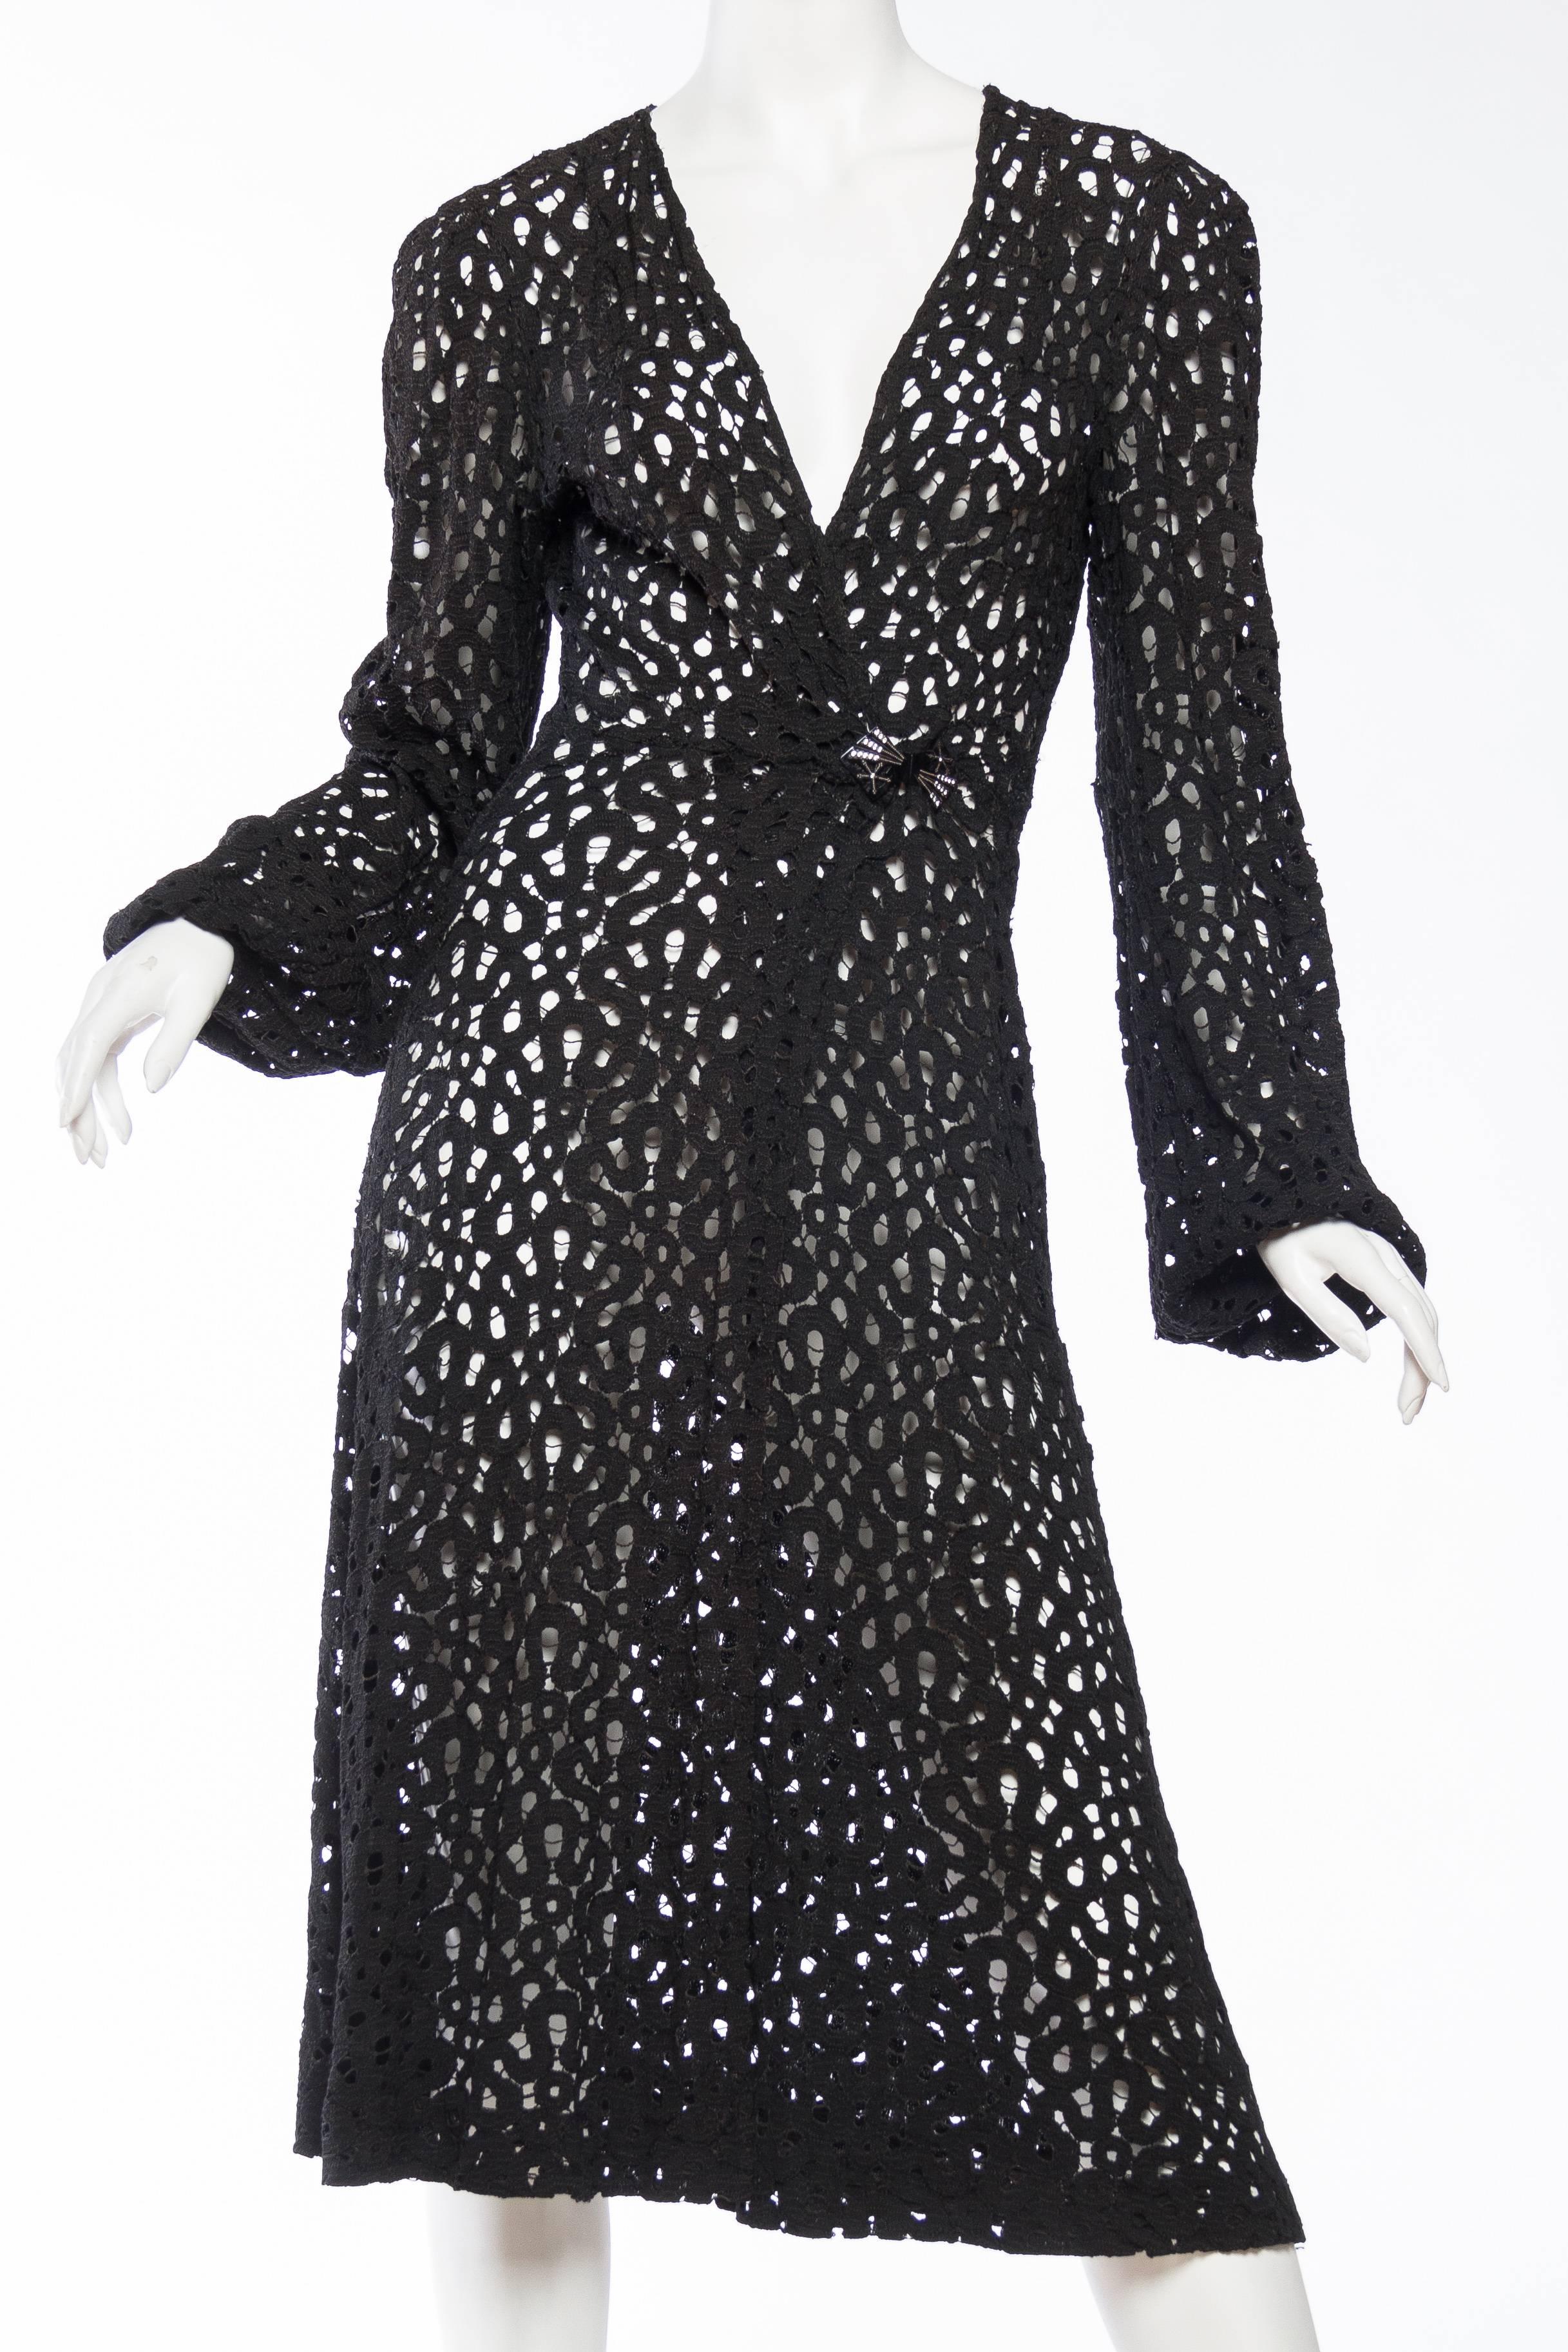 A lovely example of an early wrap dress, decades before Biba and St Laurent made them a wardrobe staple. Made from a unique lace in shades of black with an art deco clasp in the front. 